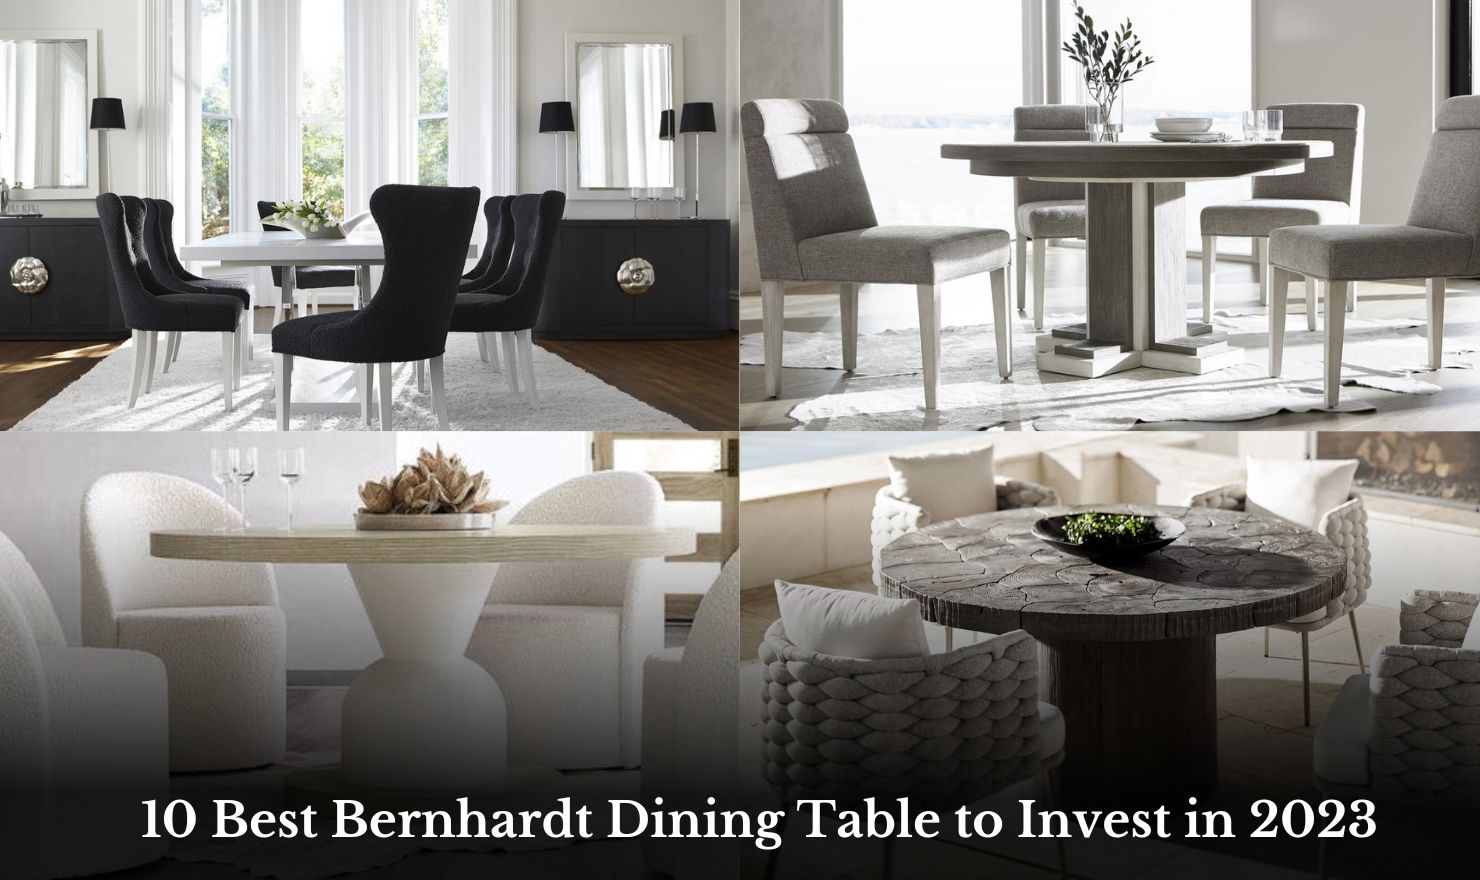 10 Best Bernhardt Dining Tables to Invest in 2023